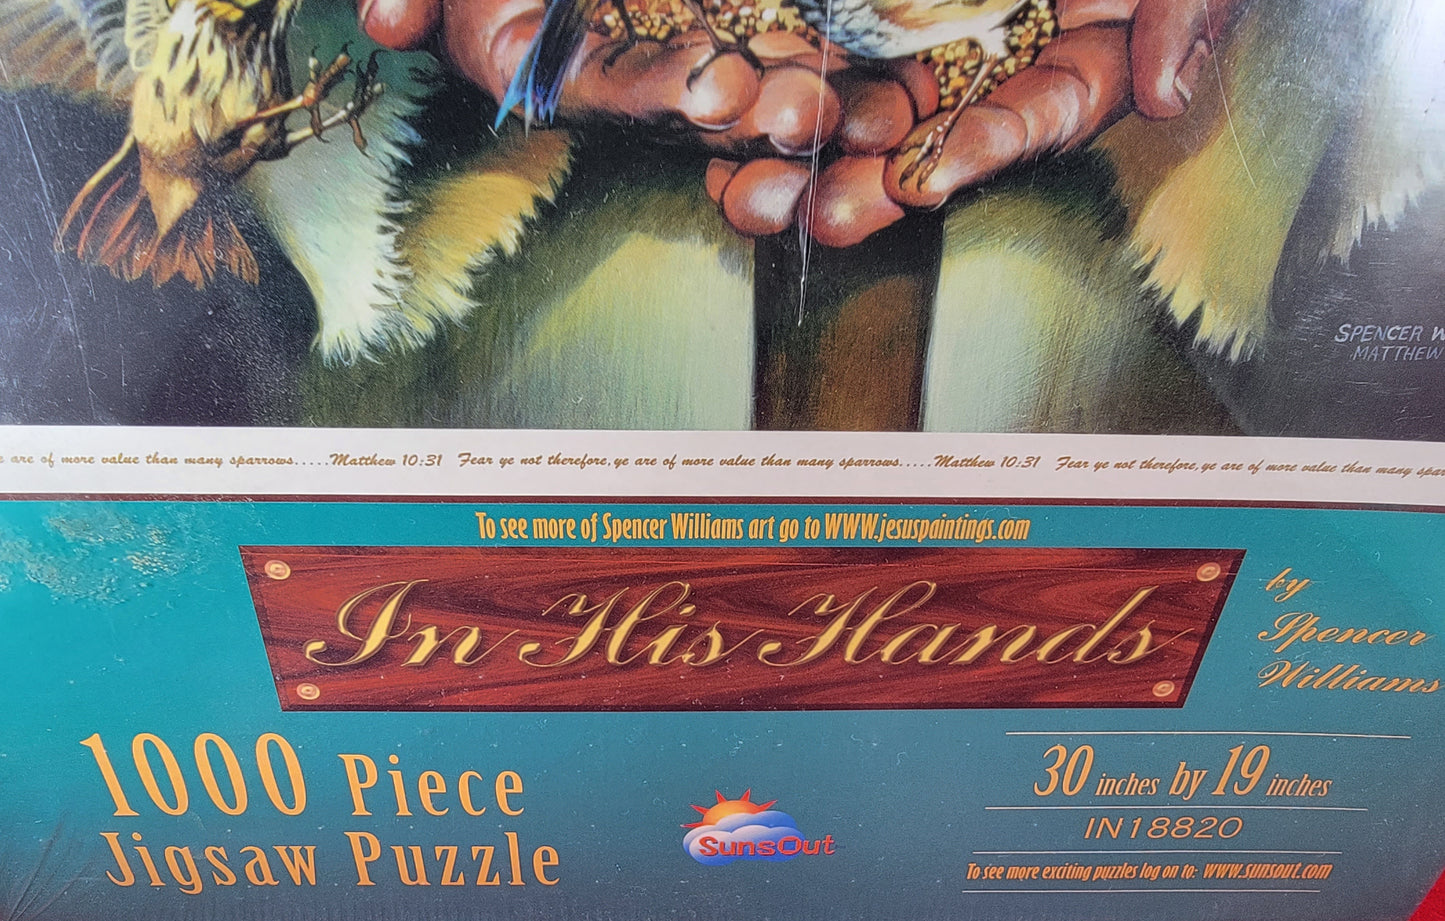 In his hands, 1000 piece jigsaw puzzle (nib)
brand new 30 inches by 19 inches puzzle. puzzle depicts Jesus with his hands out feeding the birds . the item is new and sealed.